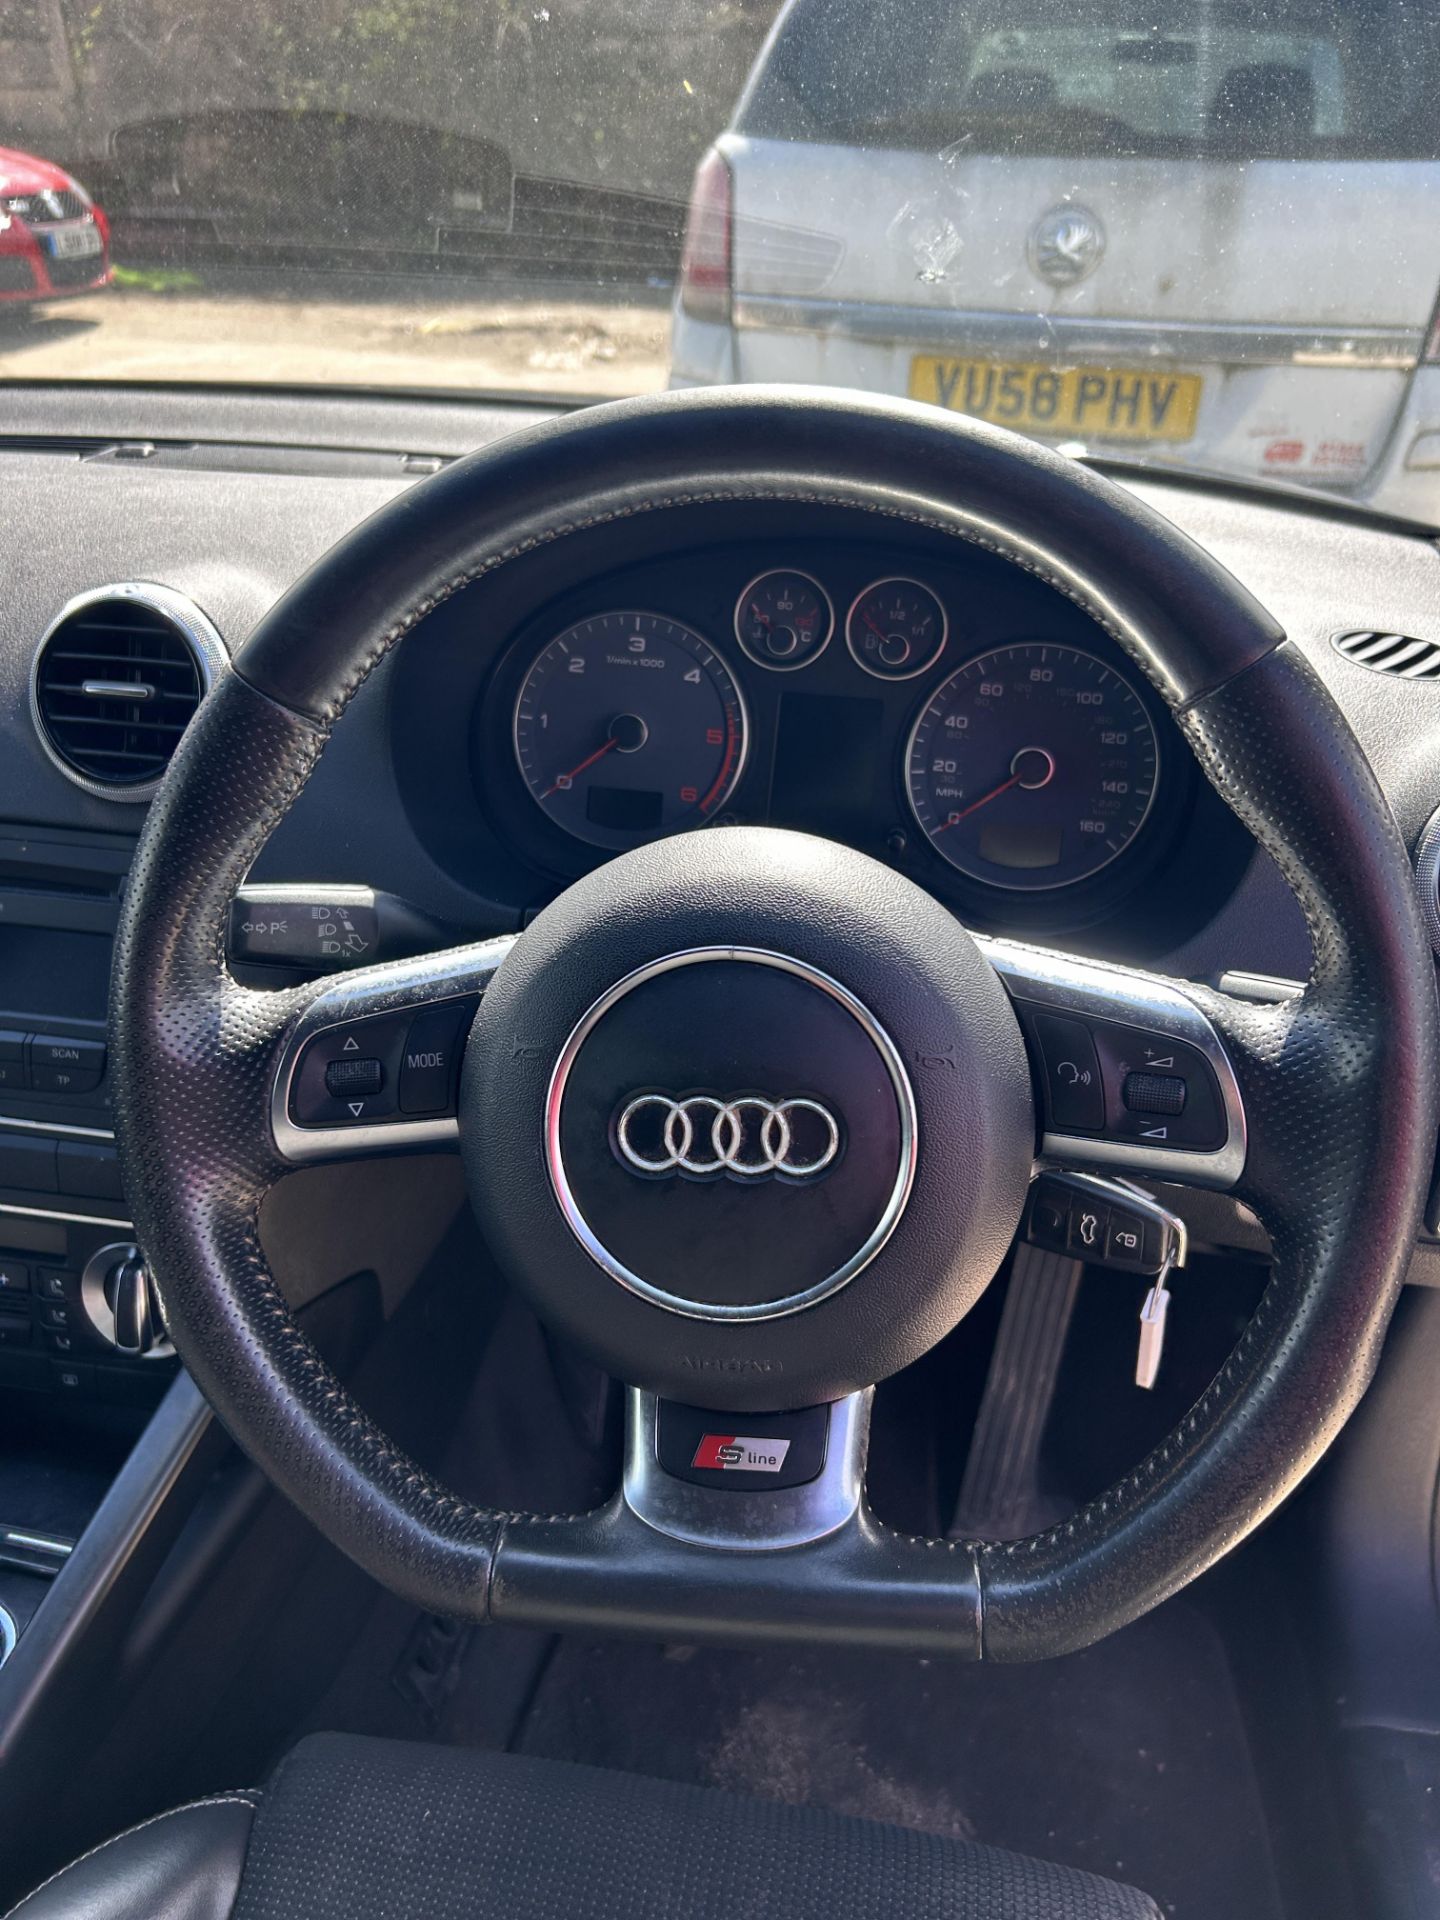 Audi A3 S Line SP TDI 138 Diesel 5 Door Hatchback | GY61 AOU | Mileage: TBC - Image 11 of 11